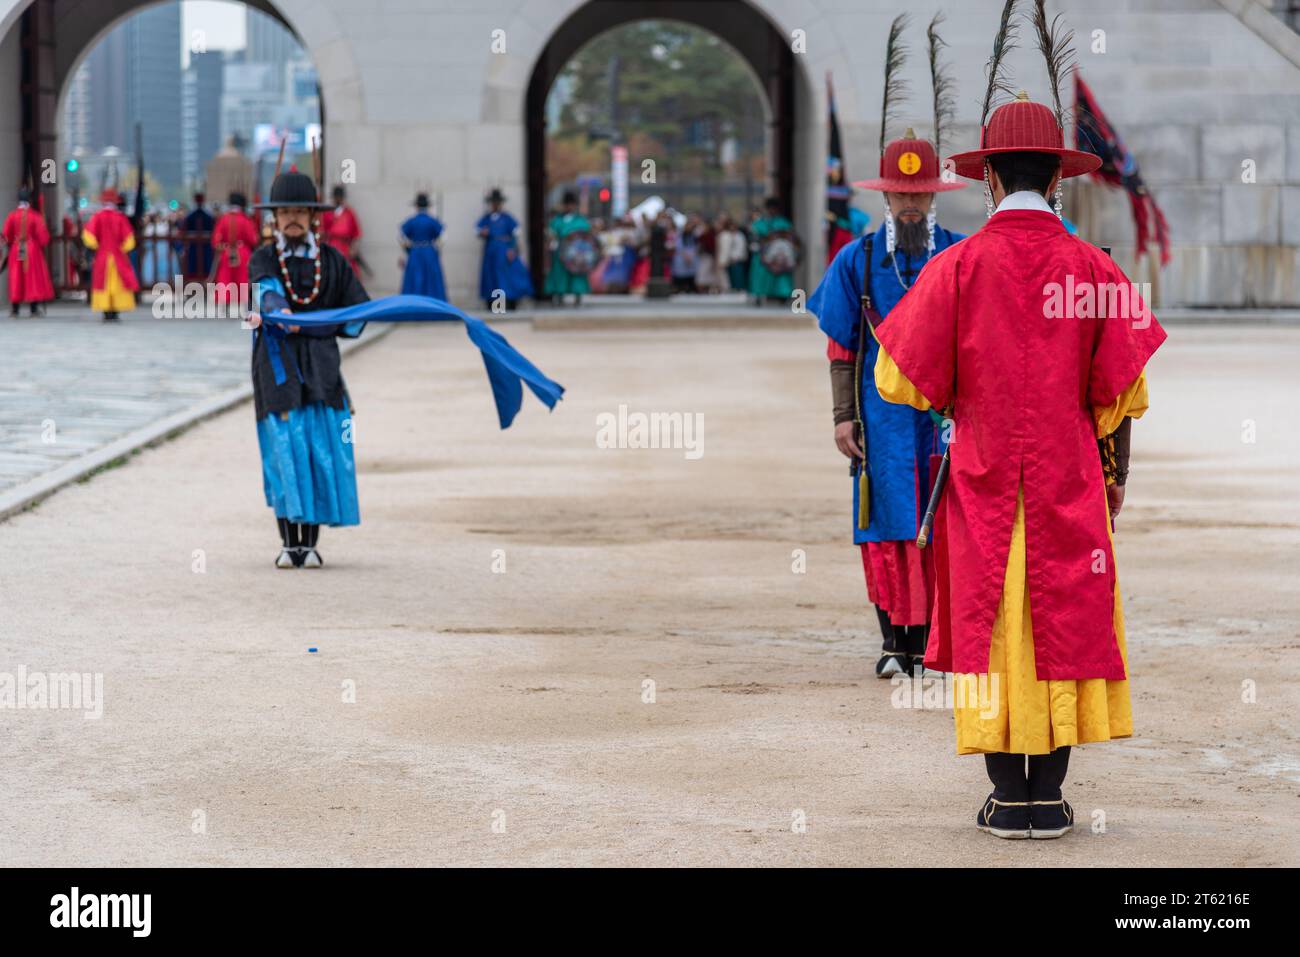 Reenactment of change of Korean royal guards ceremony in historical Joseon costumes in Gyeongbokgung palace in Seoul, capital of South Korea on 4 Nove Stock Photo